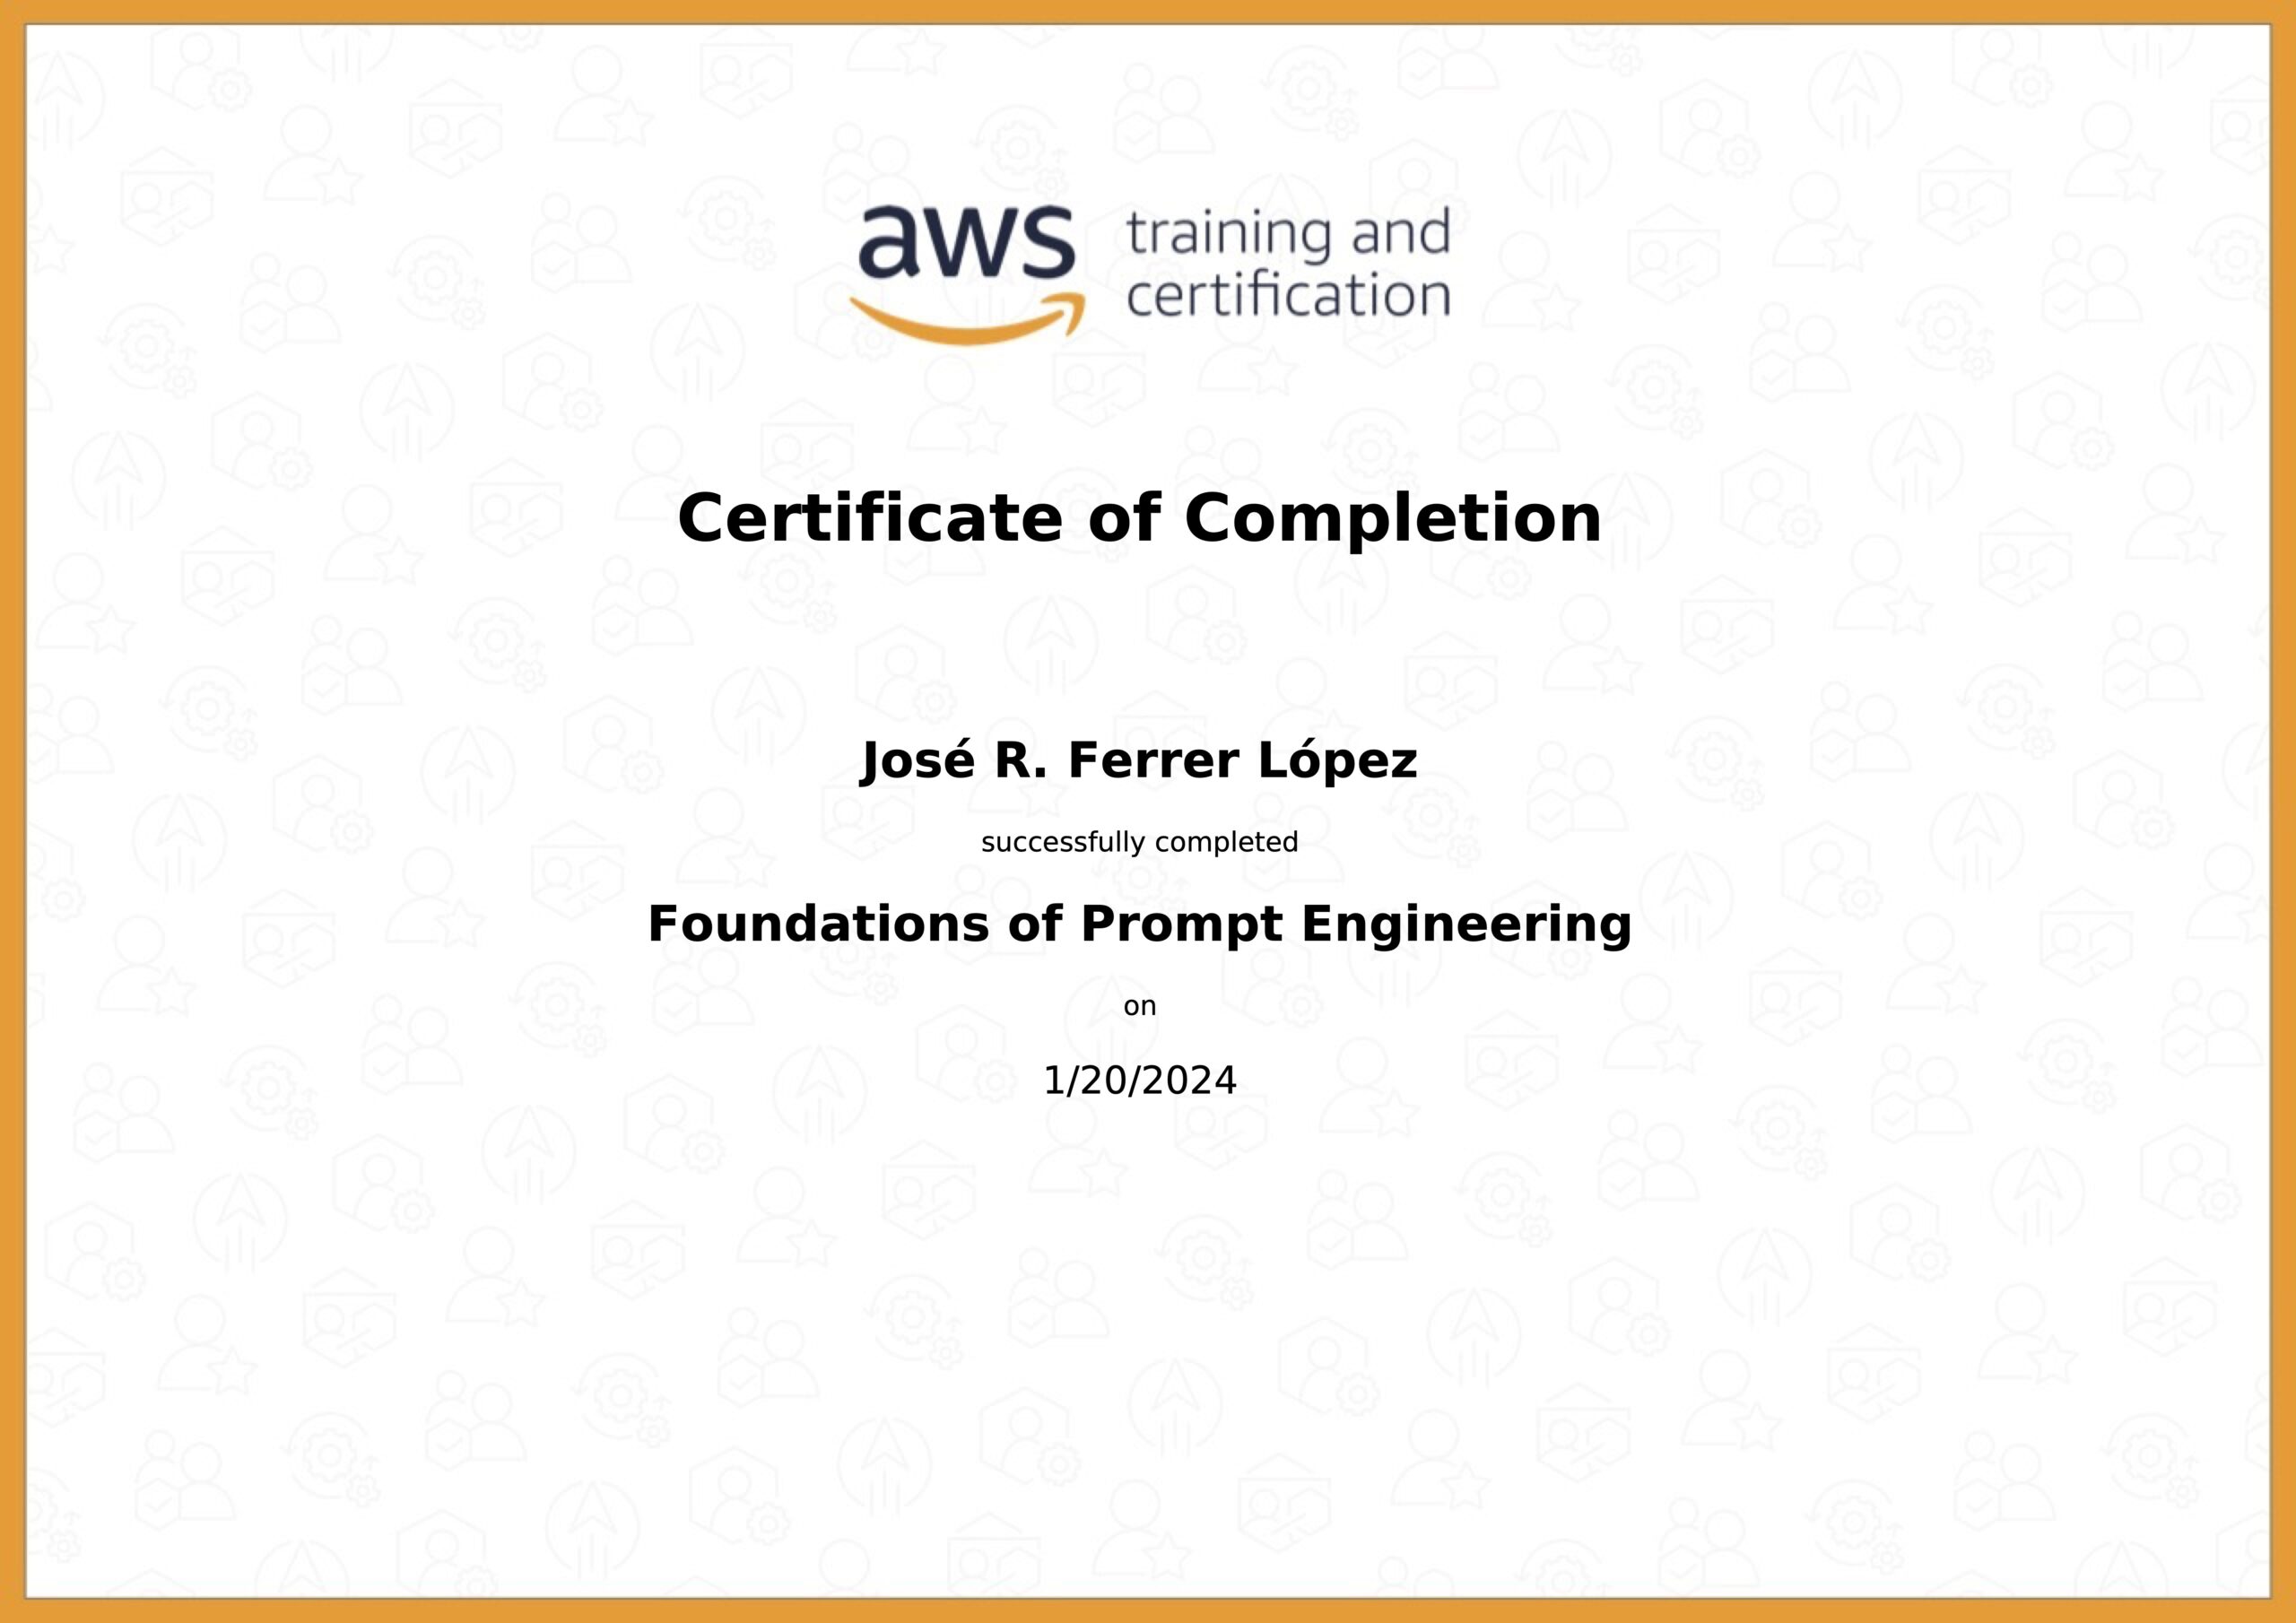 17763_5_4821872_1705771277_AWS Skill Builder Course Completion Certificate